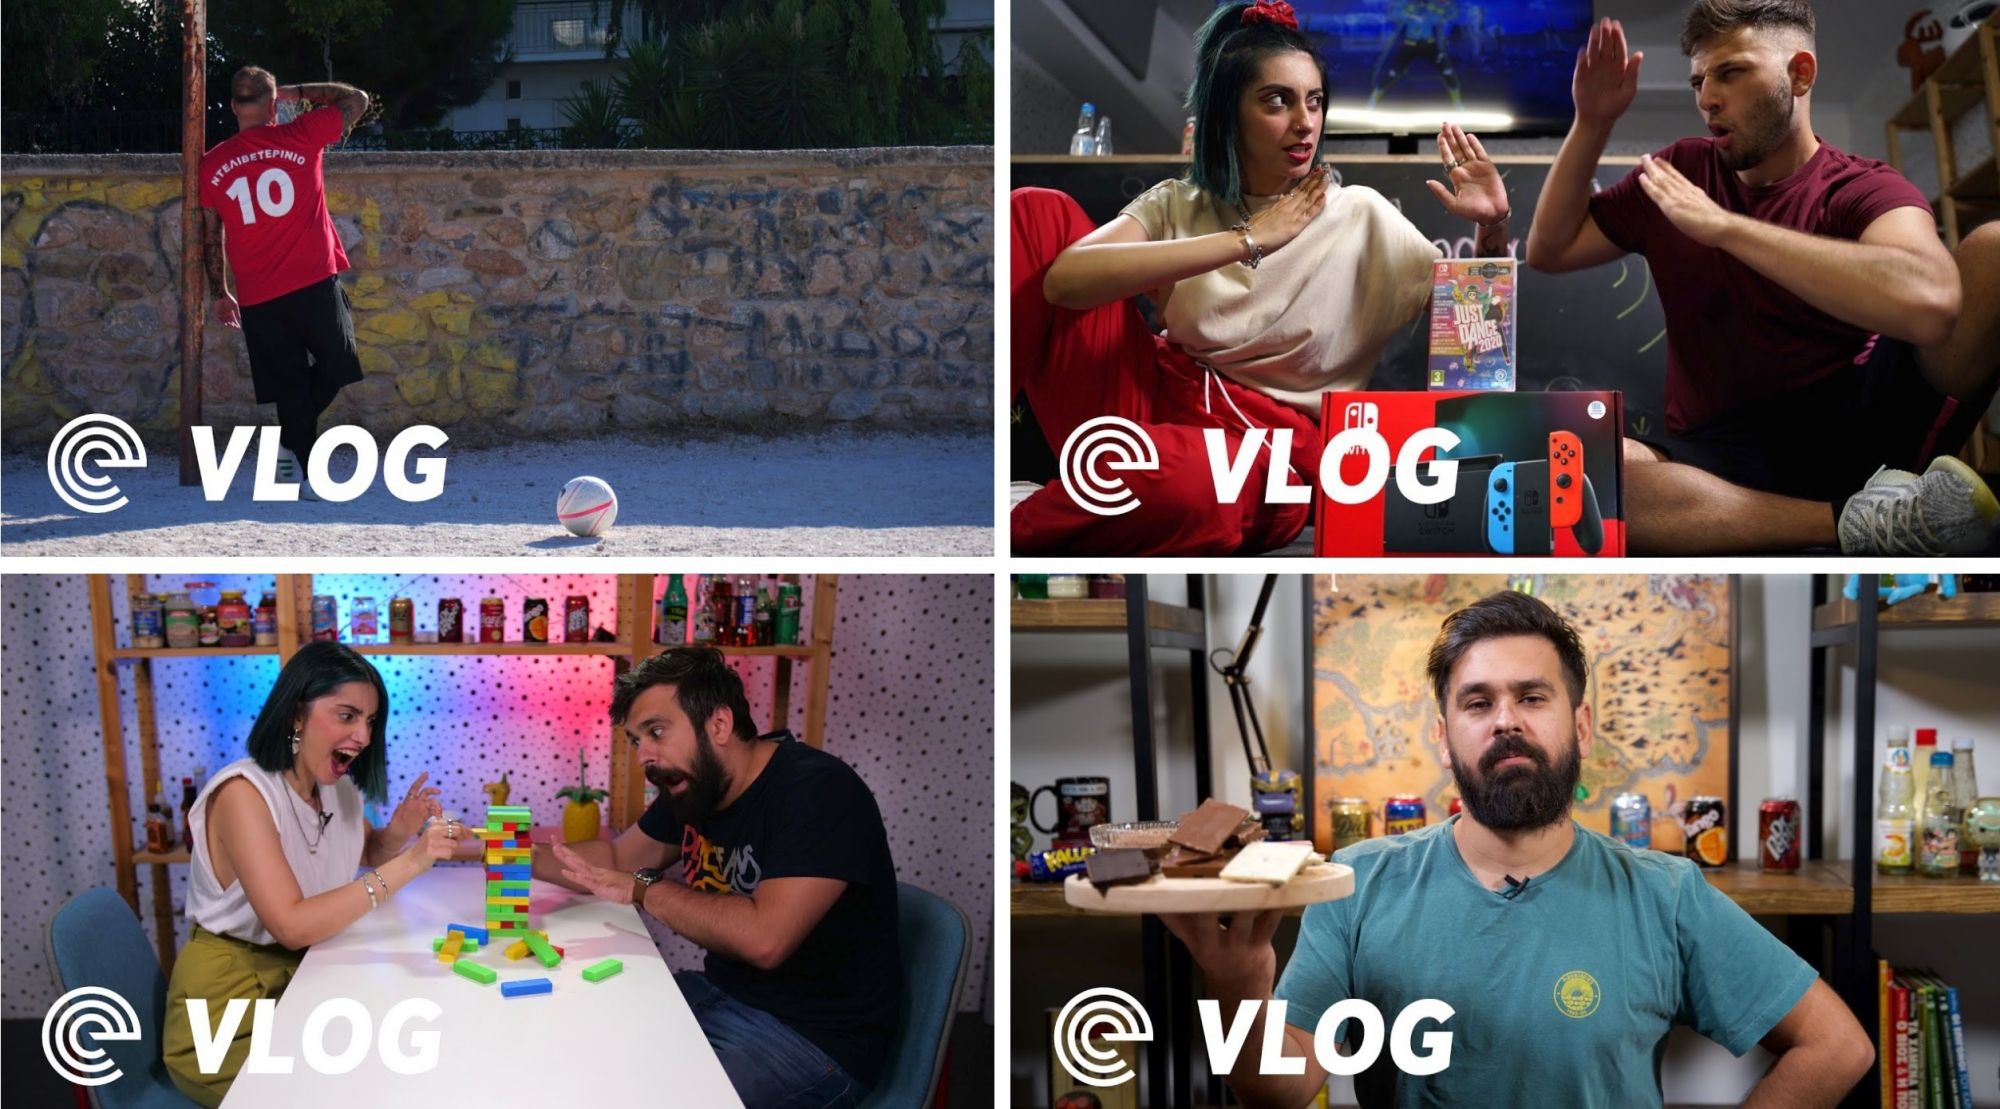 Ready, steady, vlog! How our Greek brand wins at video content